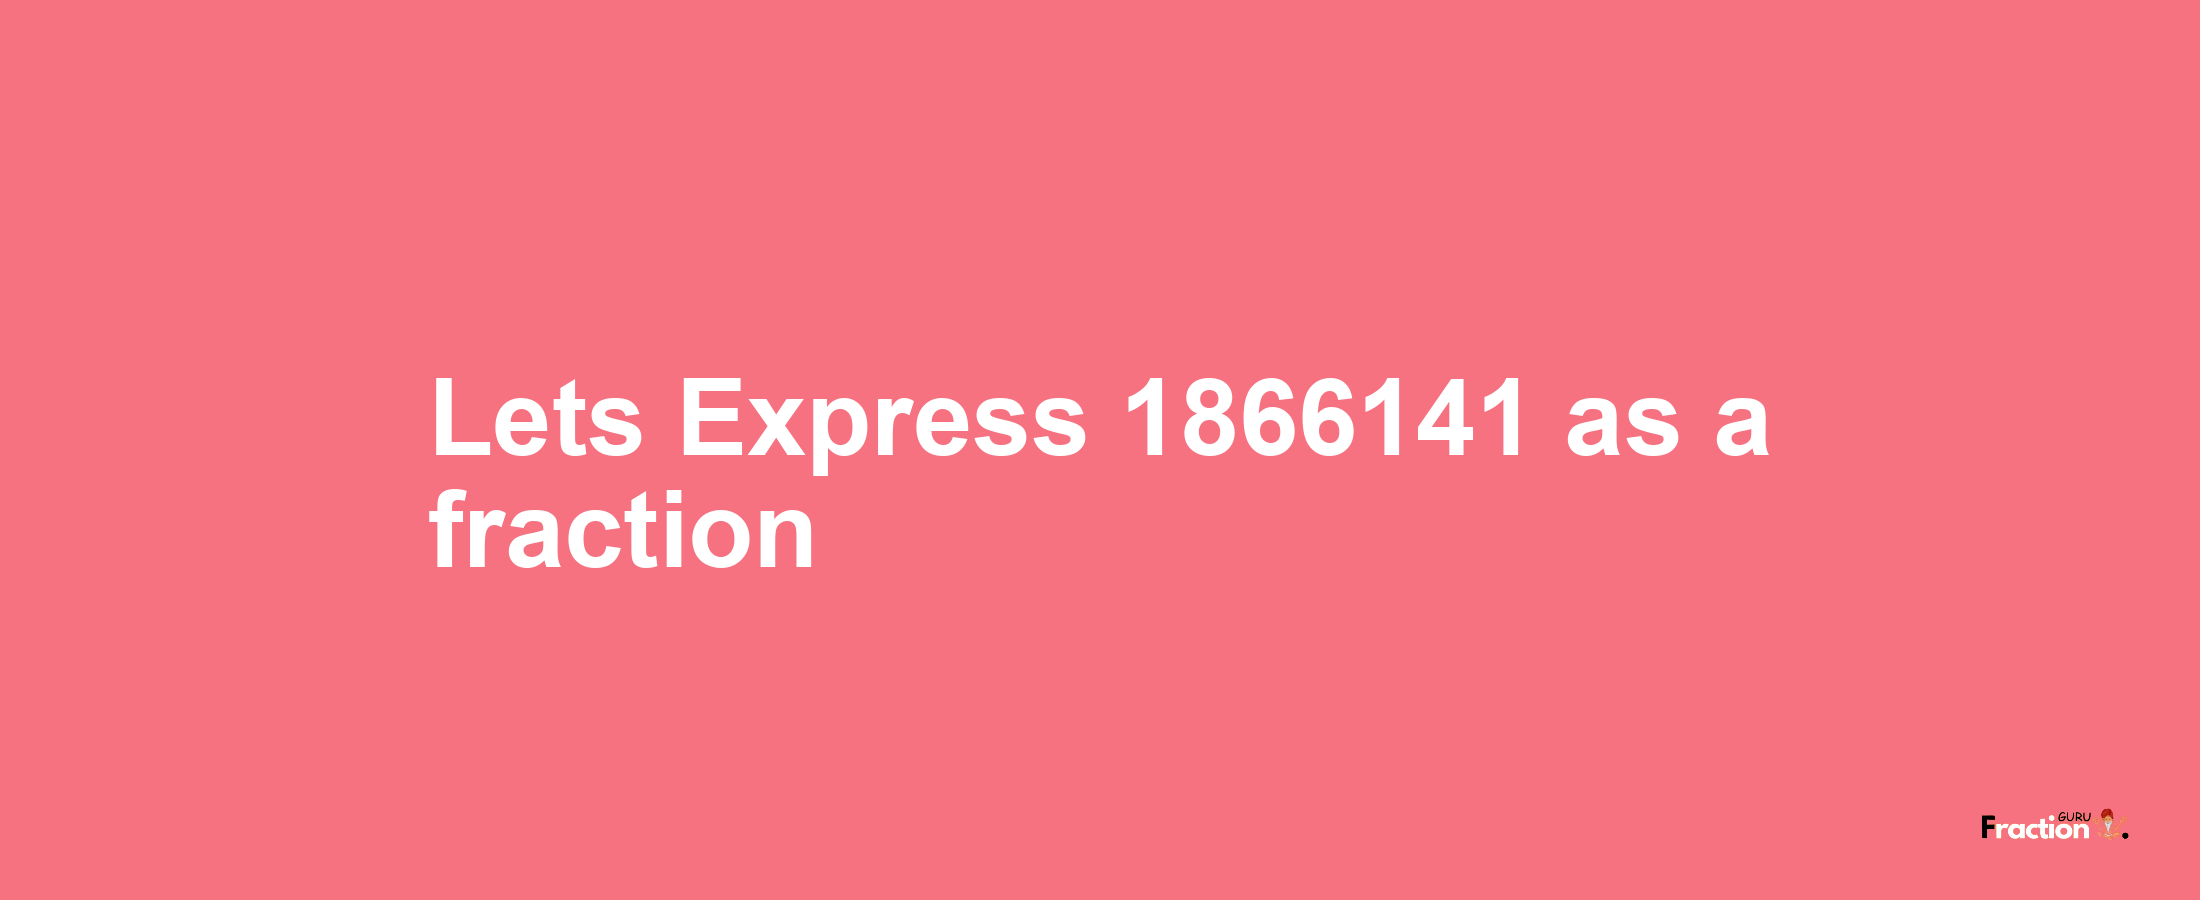 Lets Express 1866141 as afraction